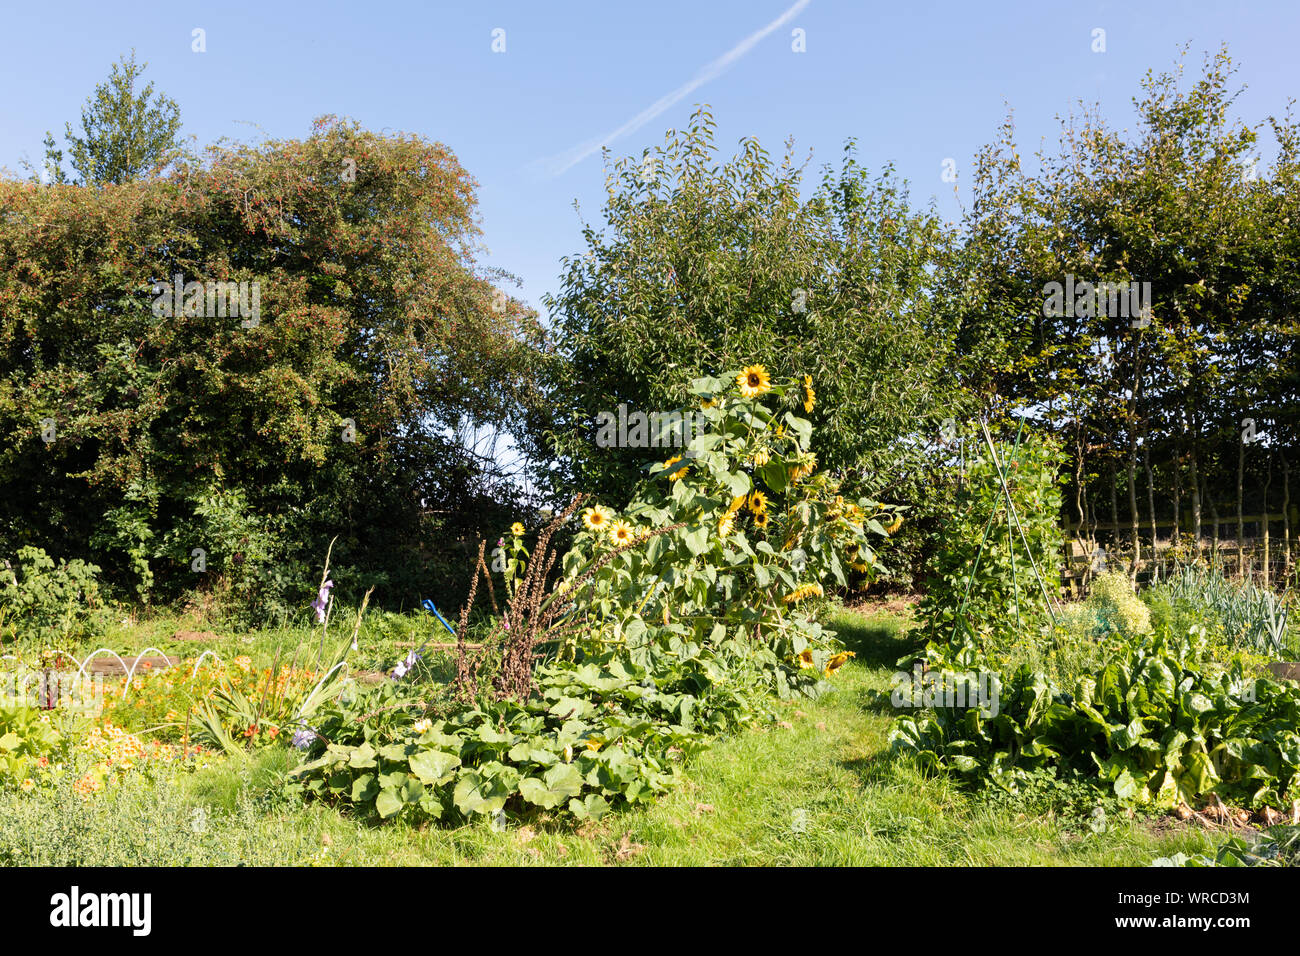 West Haddon, Northamptonshire, UK: A sunlit, partly overgrown allotment garden in late summer with sunflowers and runner beans growing in it. Stock Photo